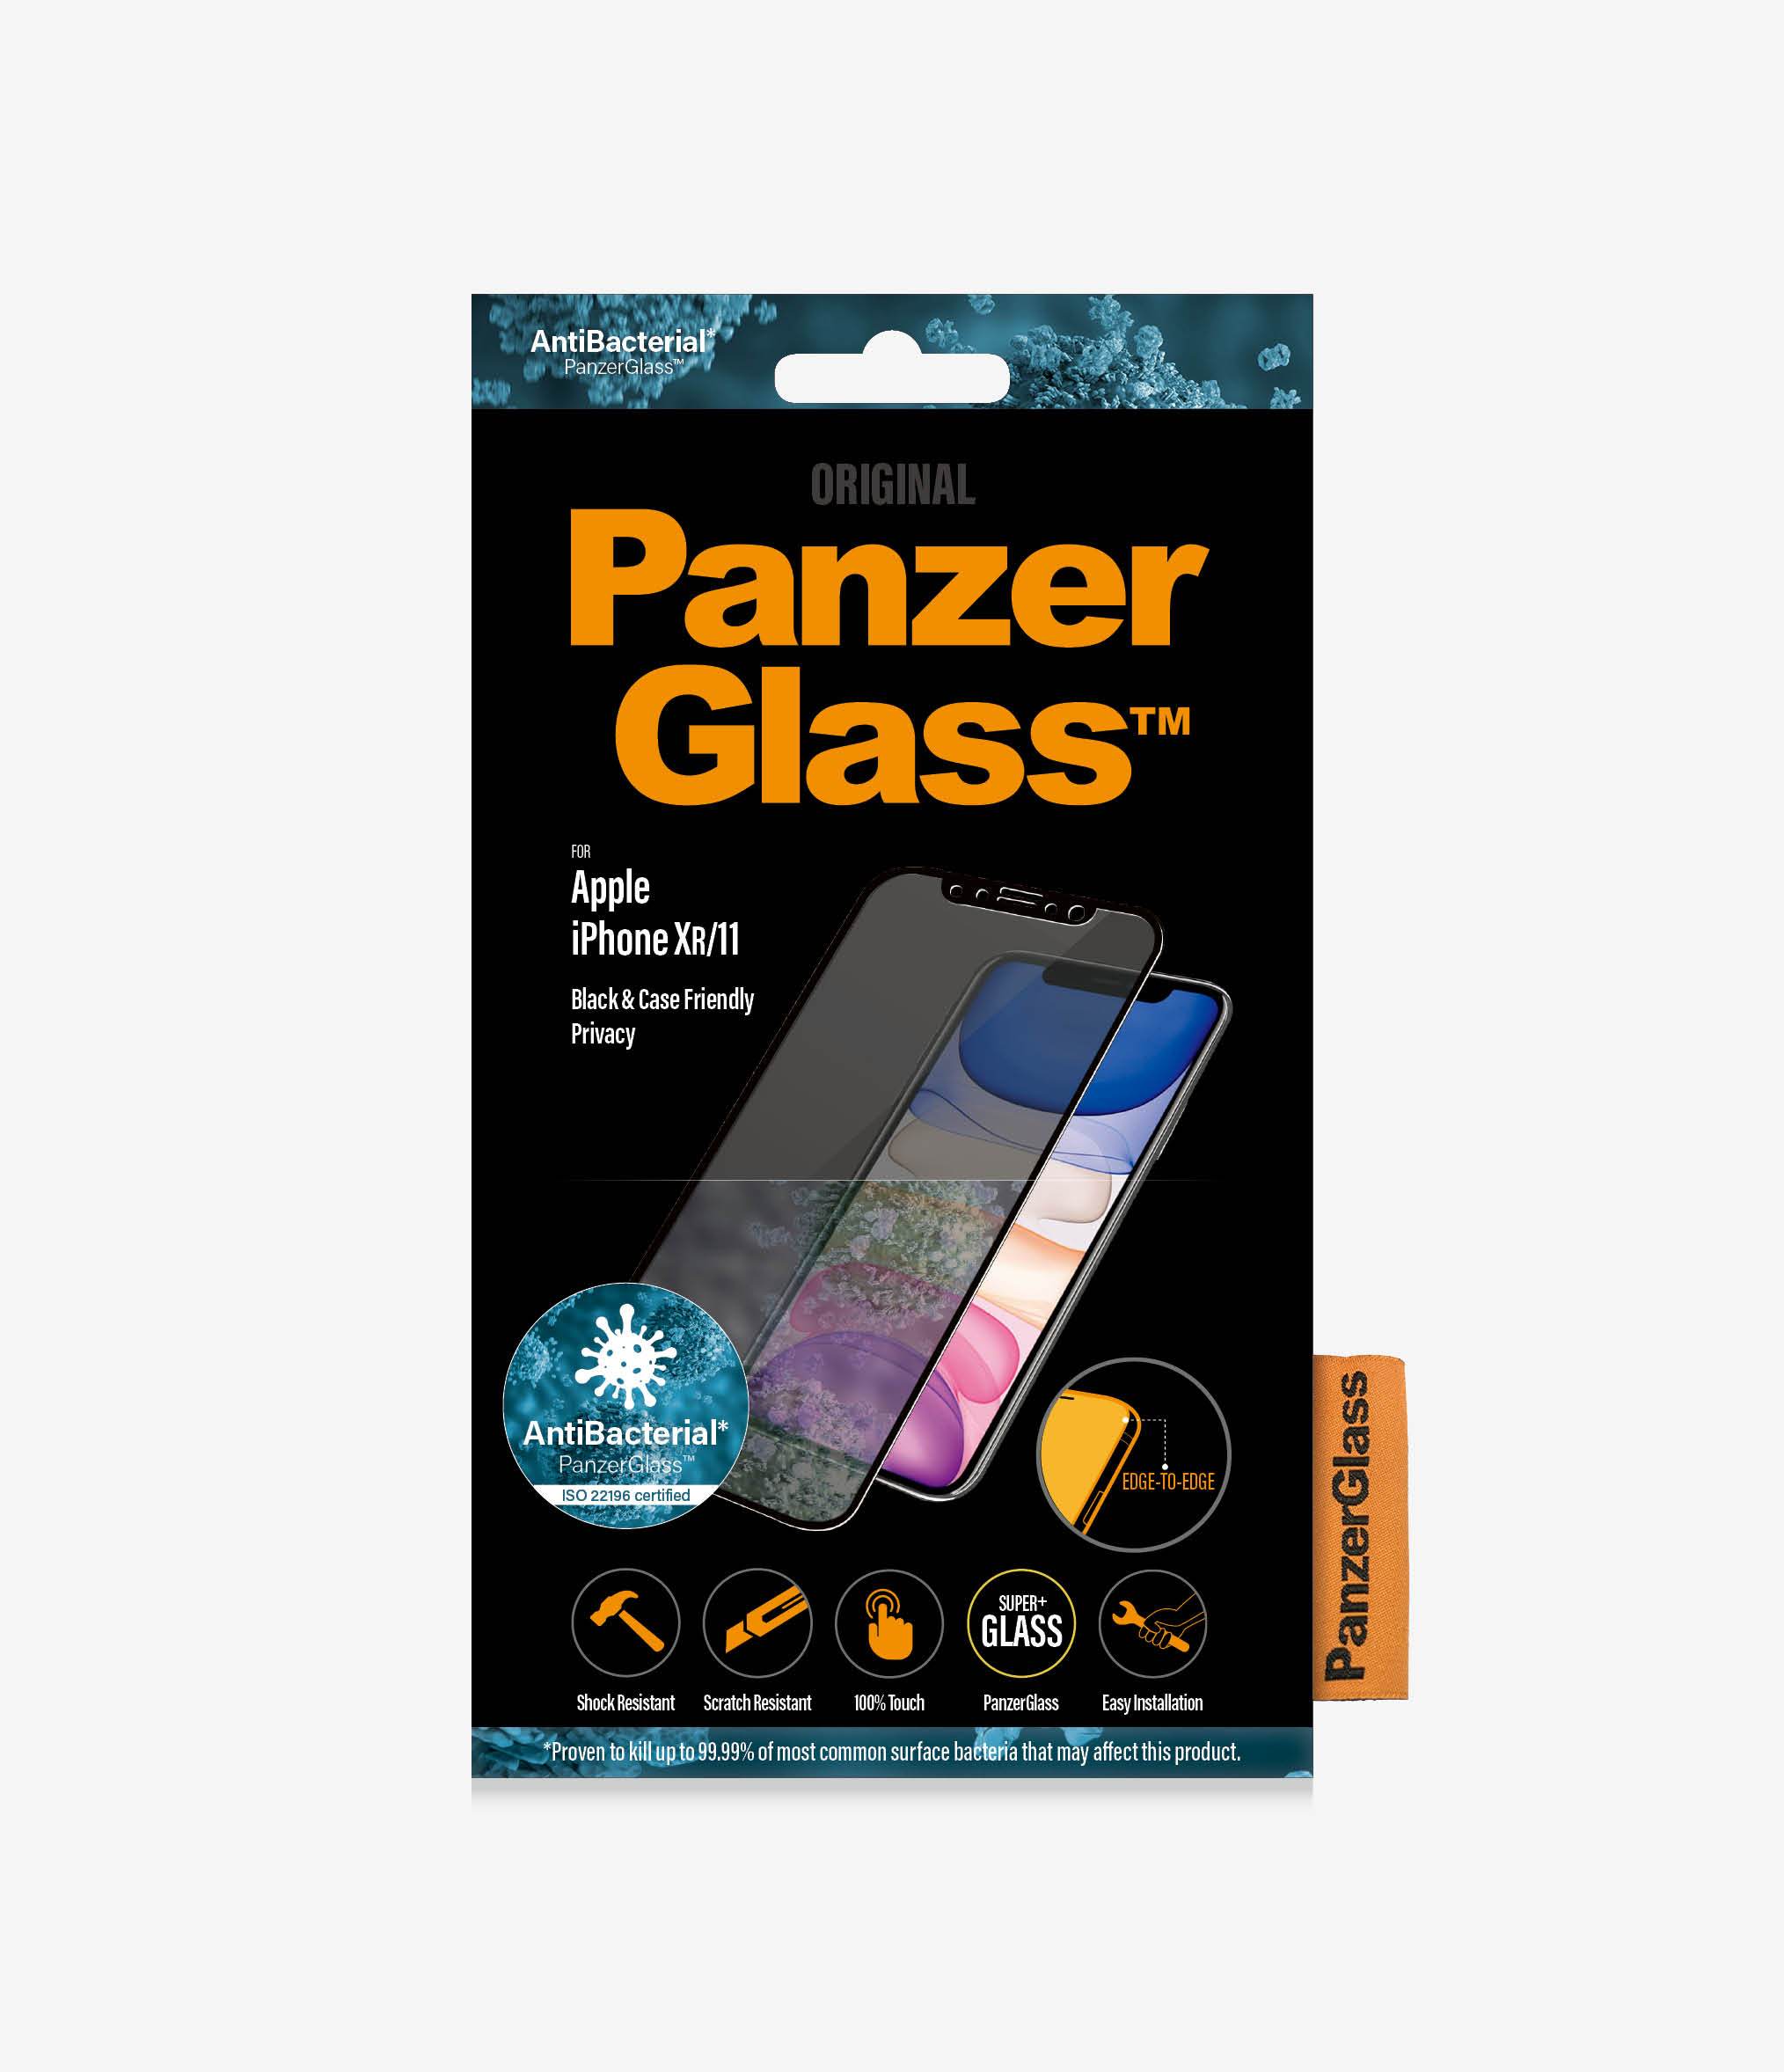 PanzerGlass™ Apple iPhone XR/11 - AntiBacterial (2665) - Screen Protector - Full frame coverage, Rounded edges, Crystal clear, 100% touch preservation